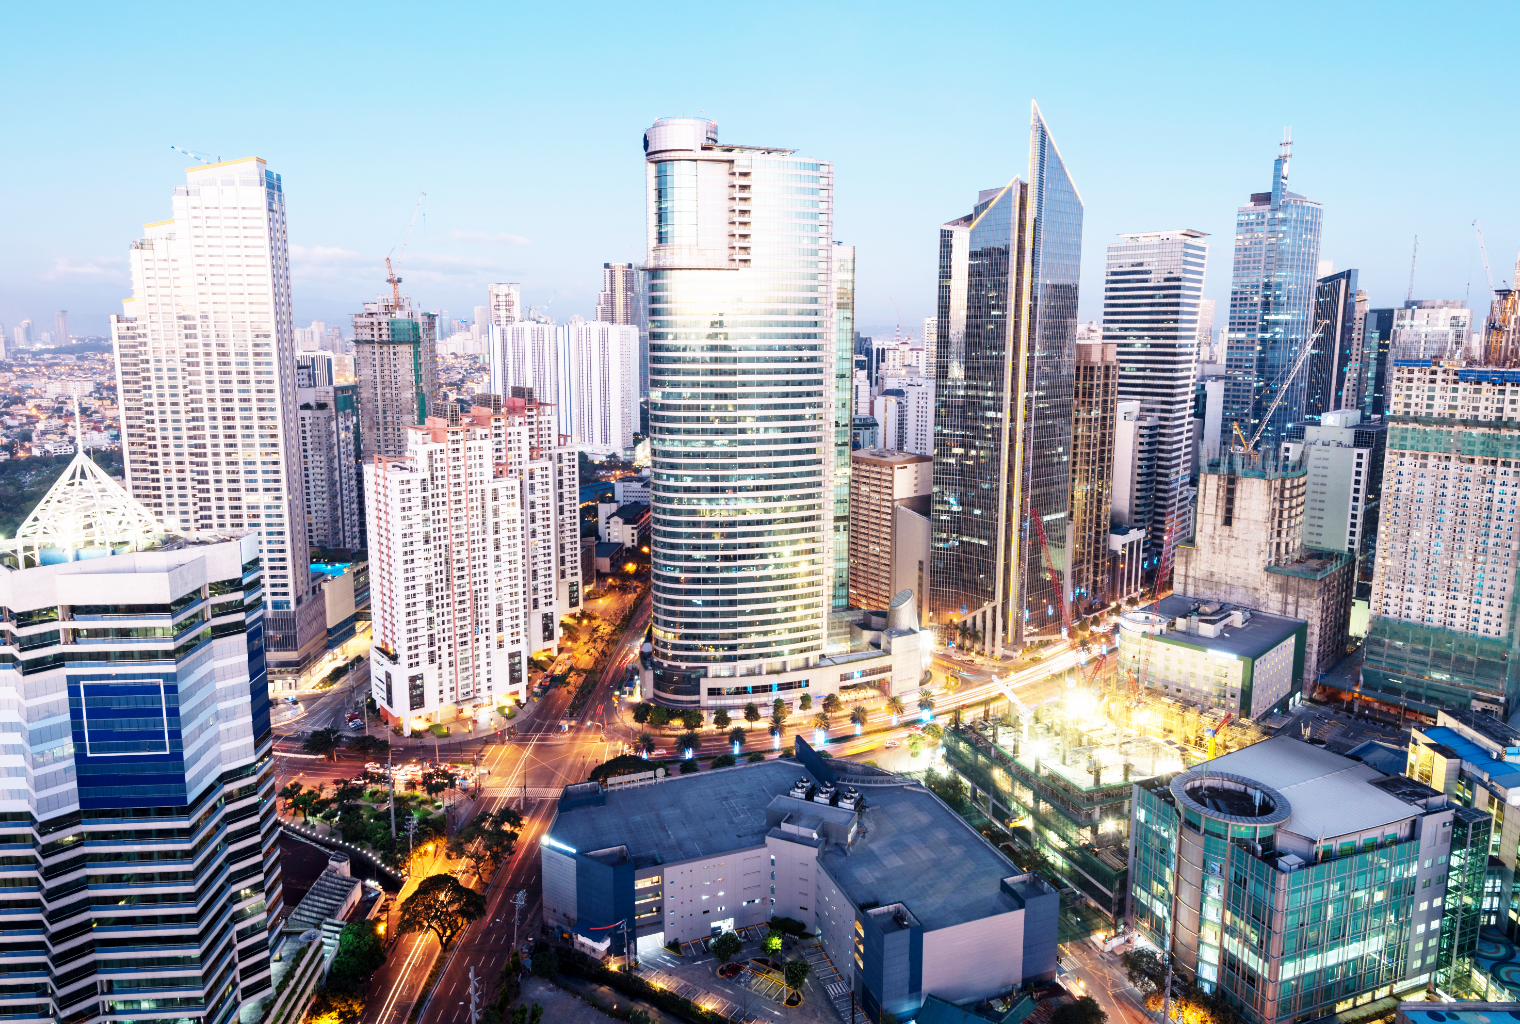 Philippines Growing More Crypto Friendly - A Look at Driving Forces